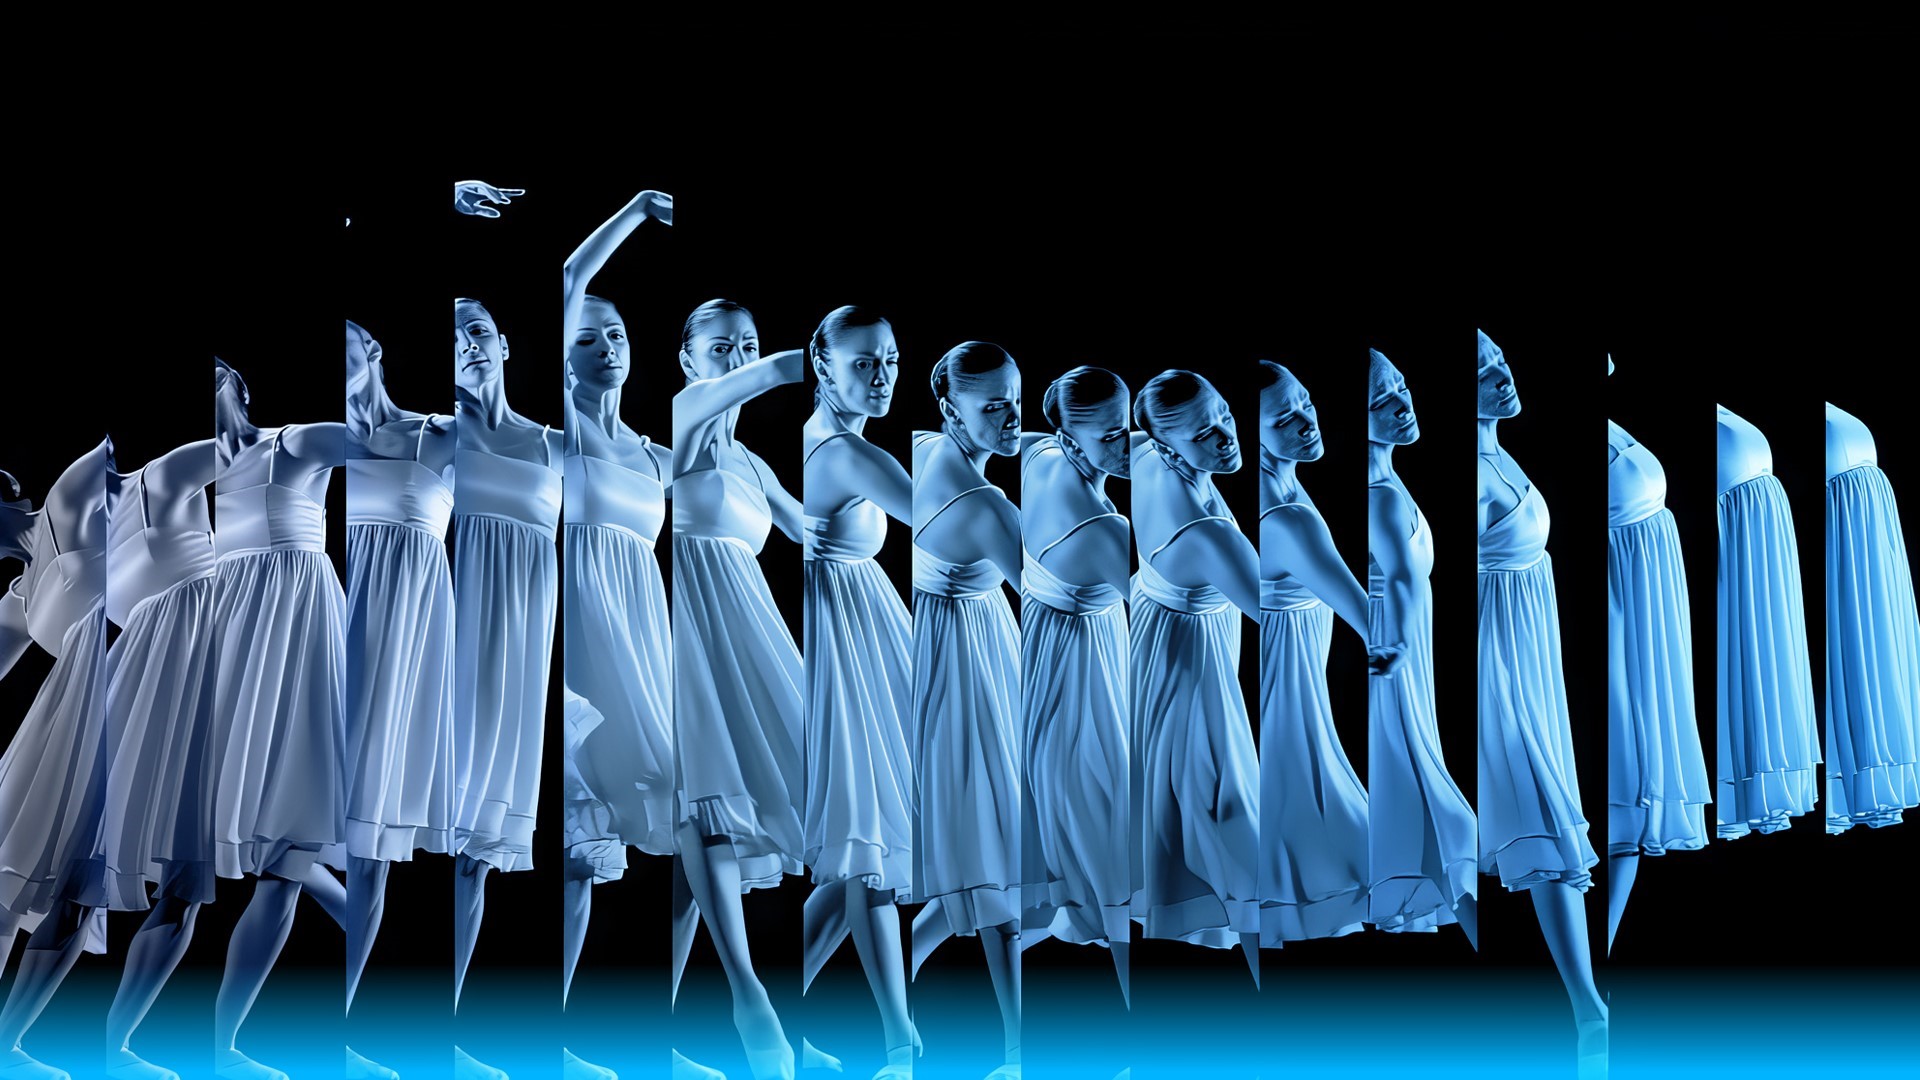 Still render from immersive installation 5 Movements. A stylized blue woman dancer